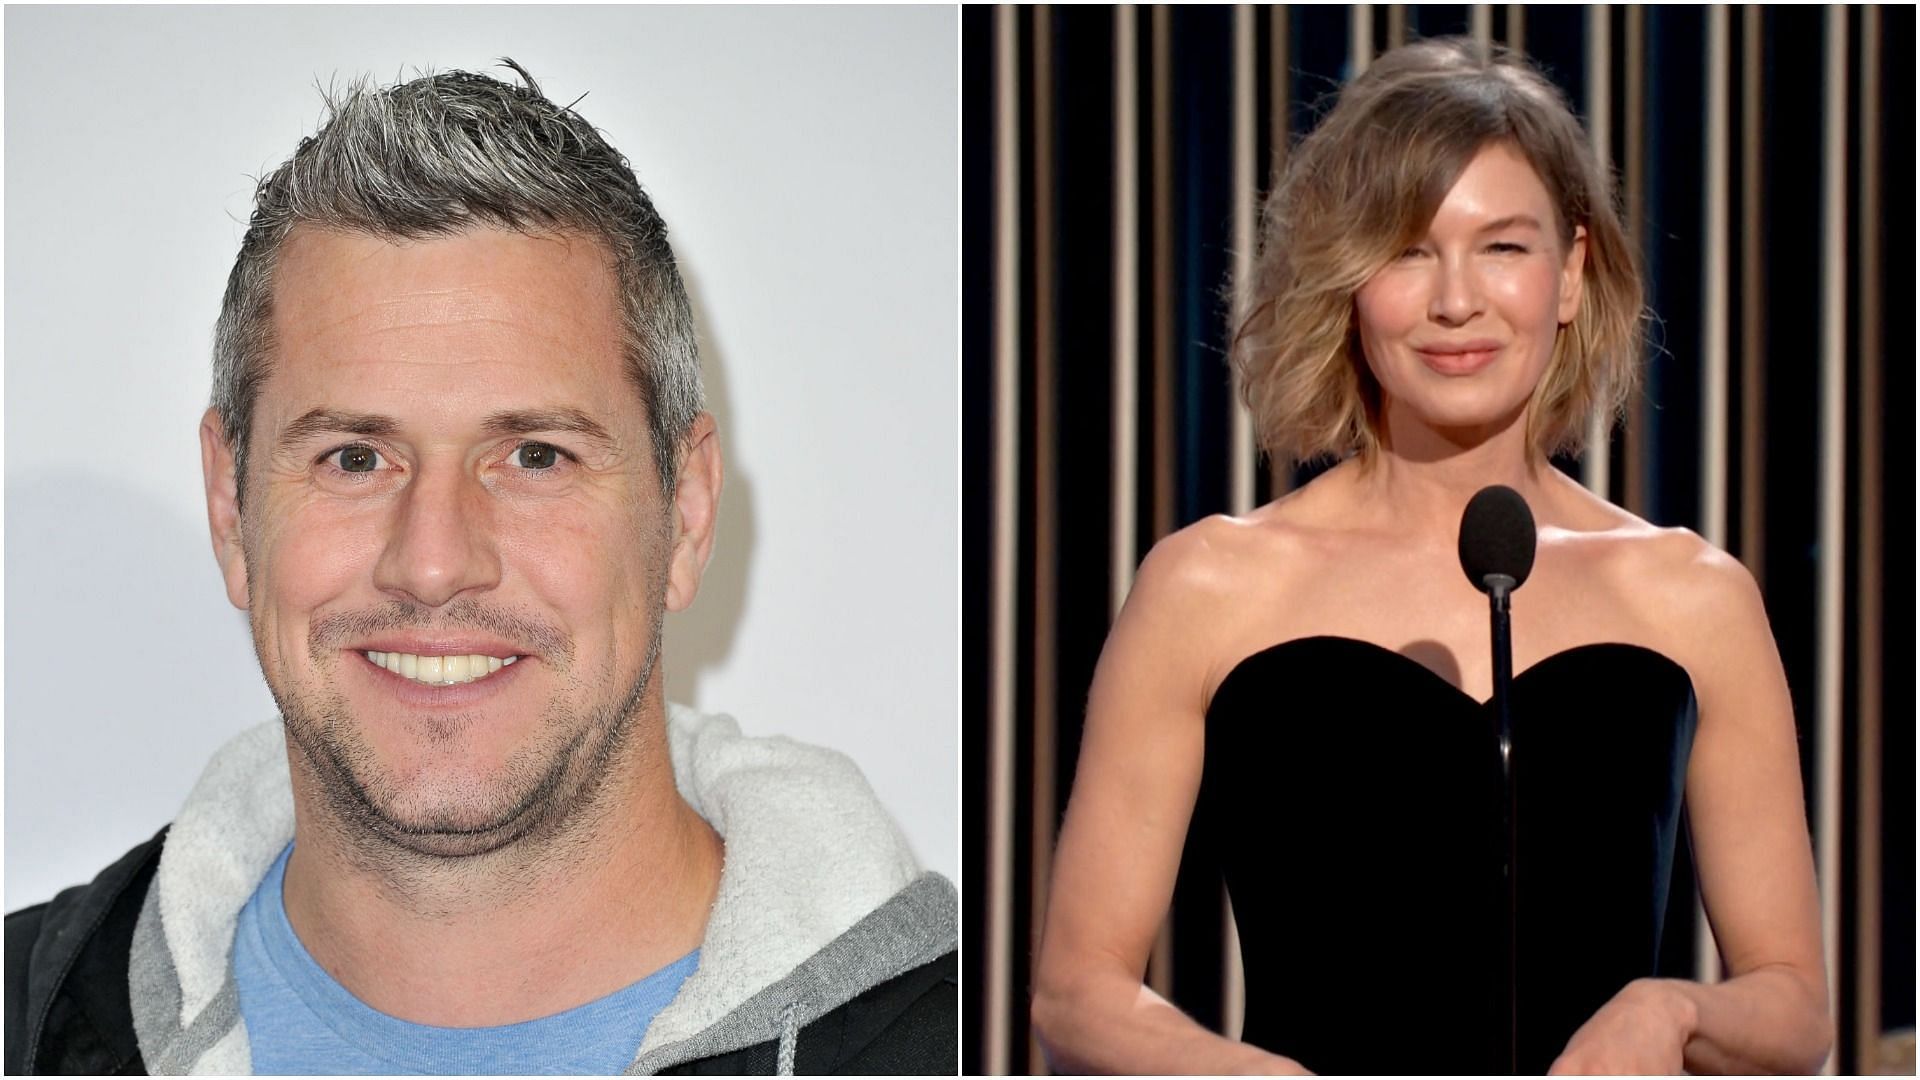 Ren&eacute;e Zellweger has rented a house across the street from boyfriend Ant Anstead (Images via Getty Images)